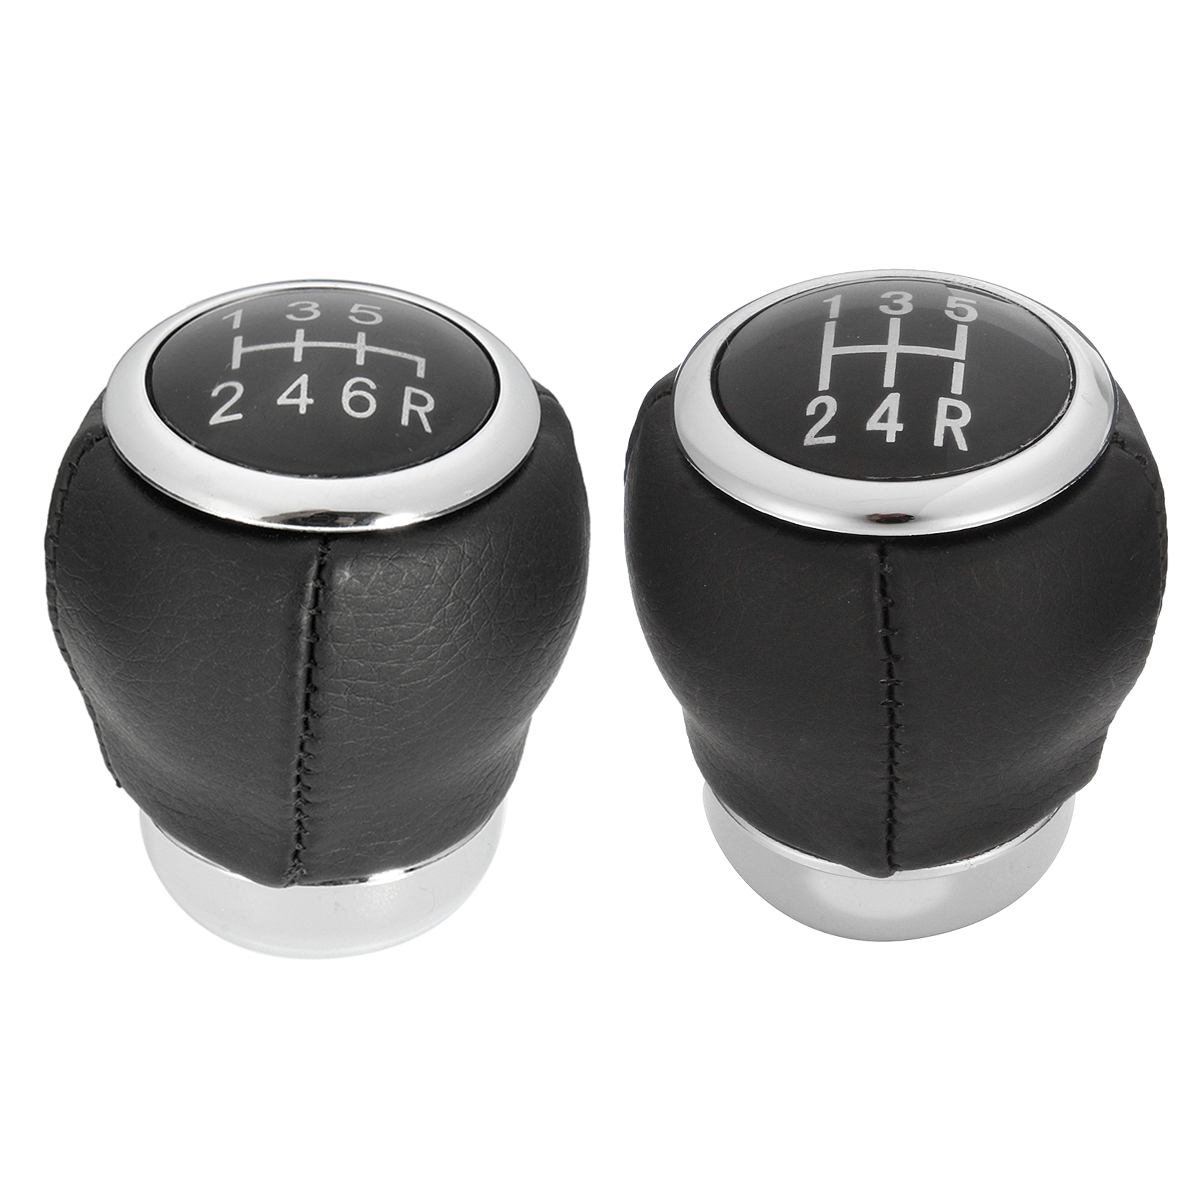 

6 5 Speed Gear Stick Shift Knob For Subaru Outback And For Legacy Forester Impreza STI WRX